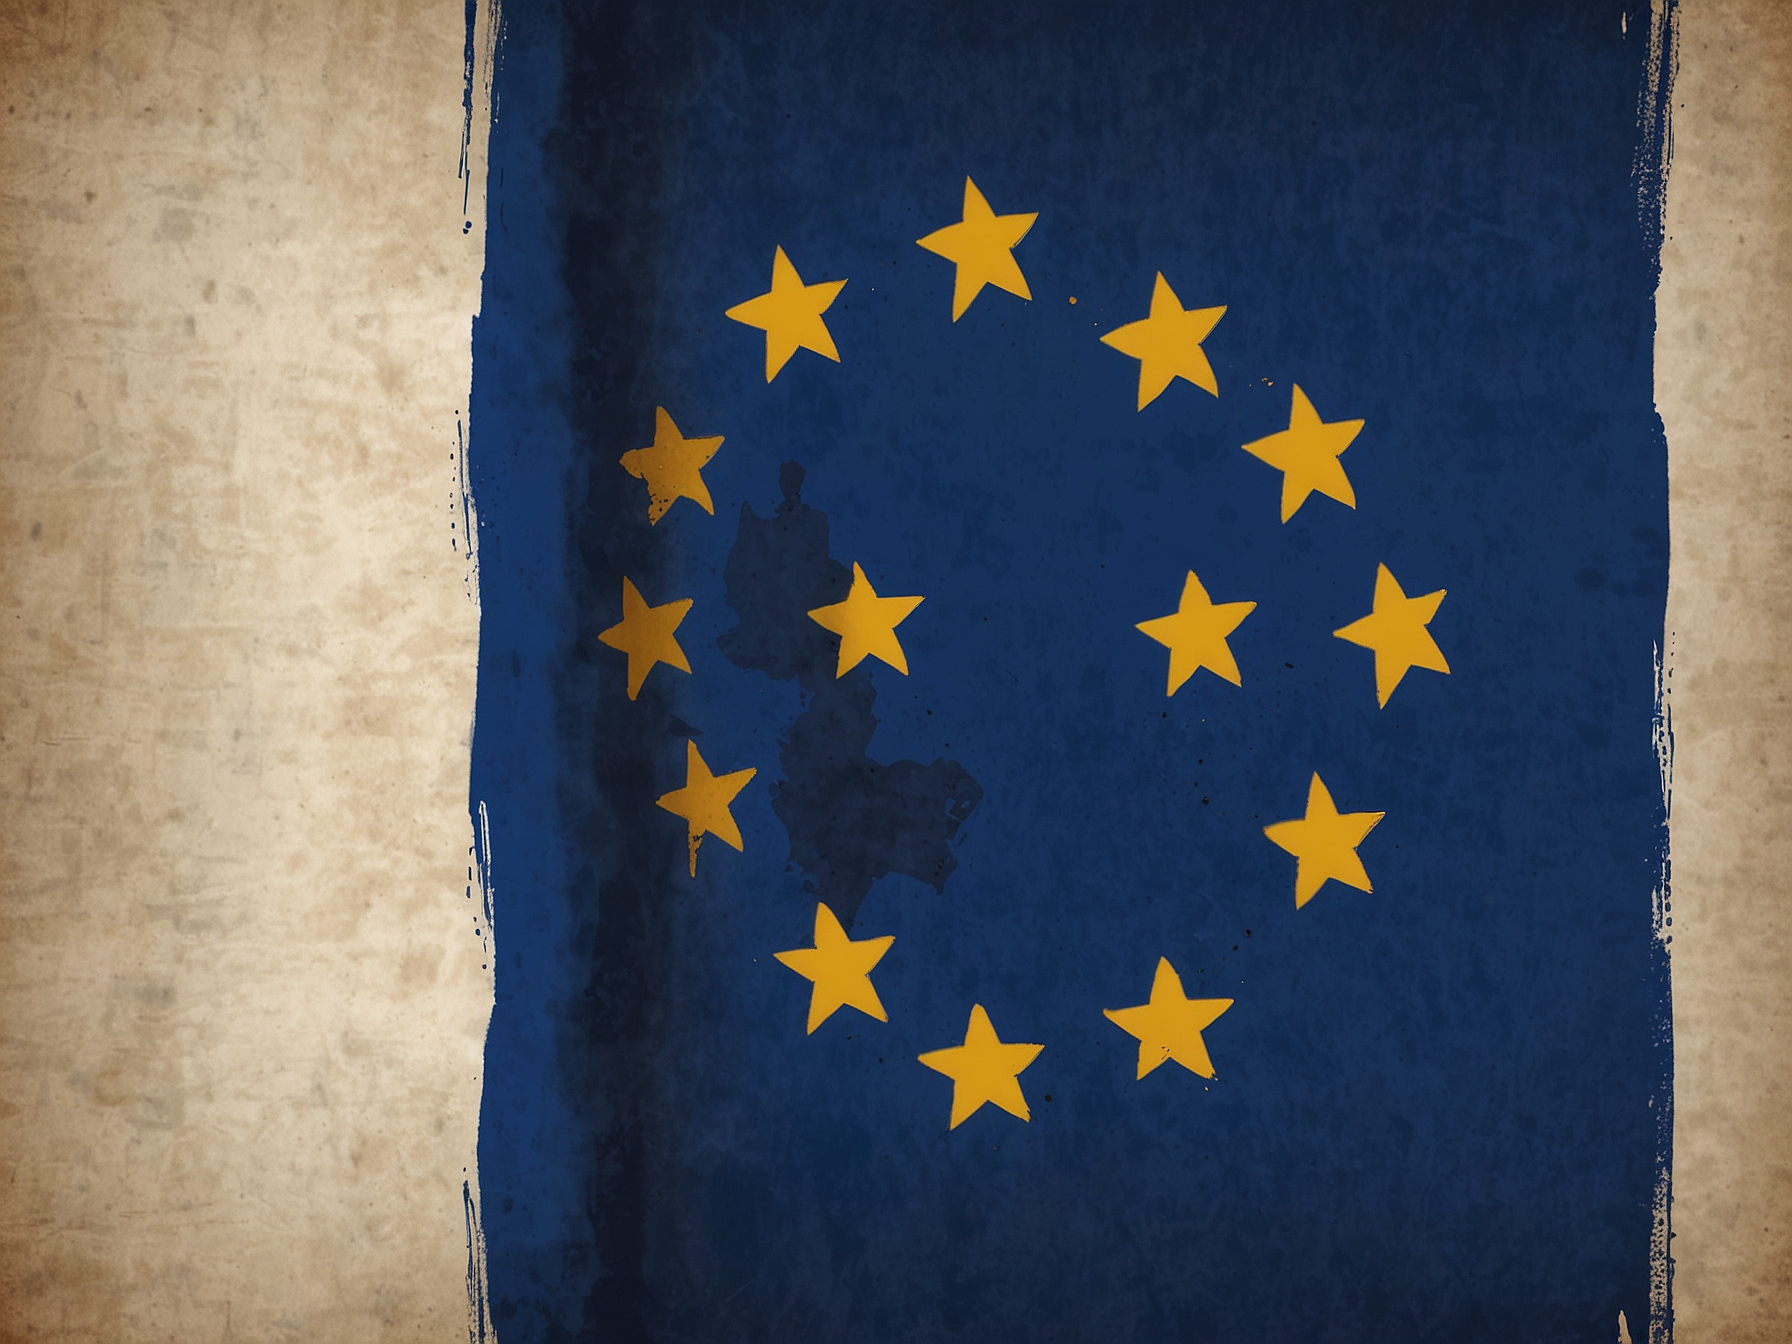 An illustration showing the European Union flag with the Meta logo, symbolizing the scrutiny Meta faces regarding its 'pay or consent' practices and compliance with GDPR.